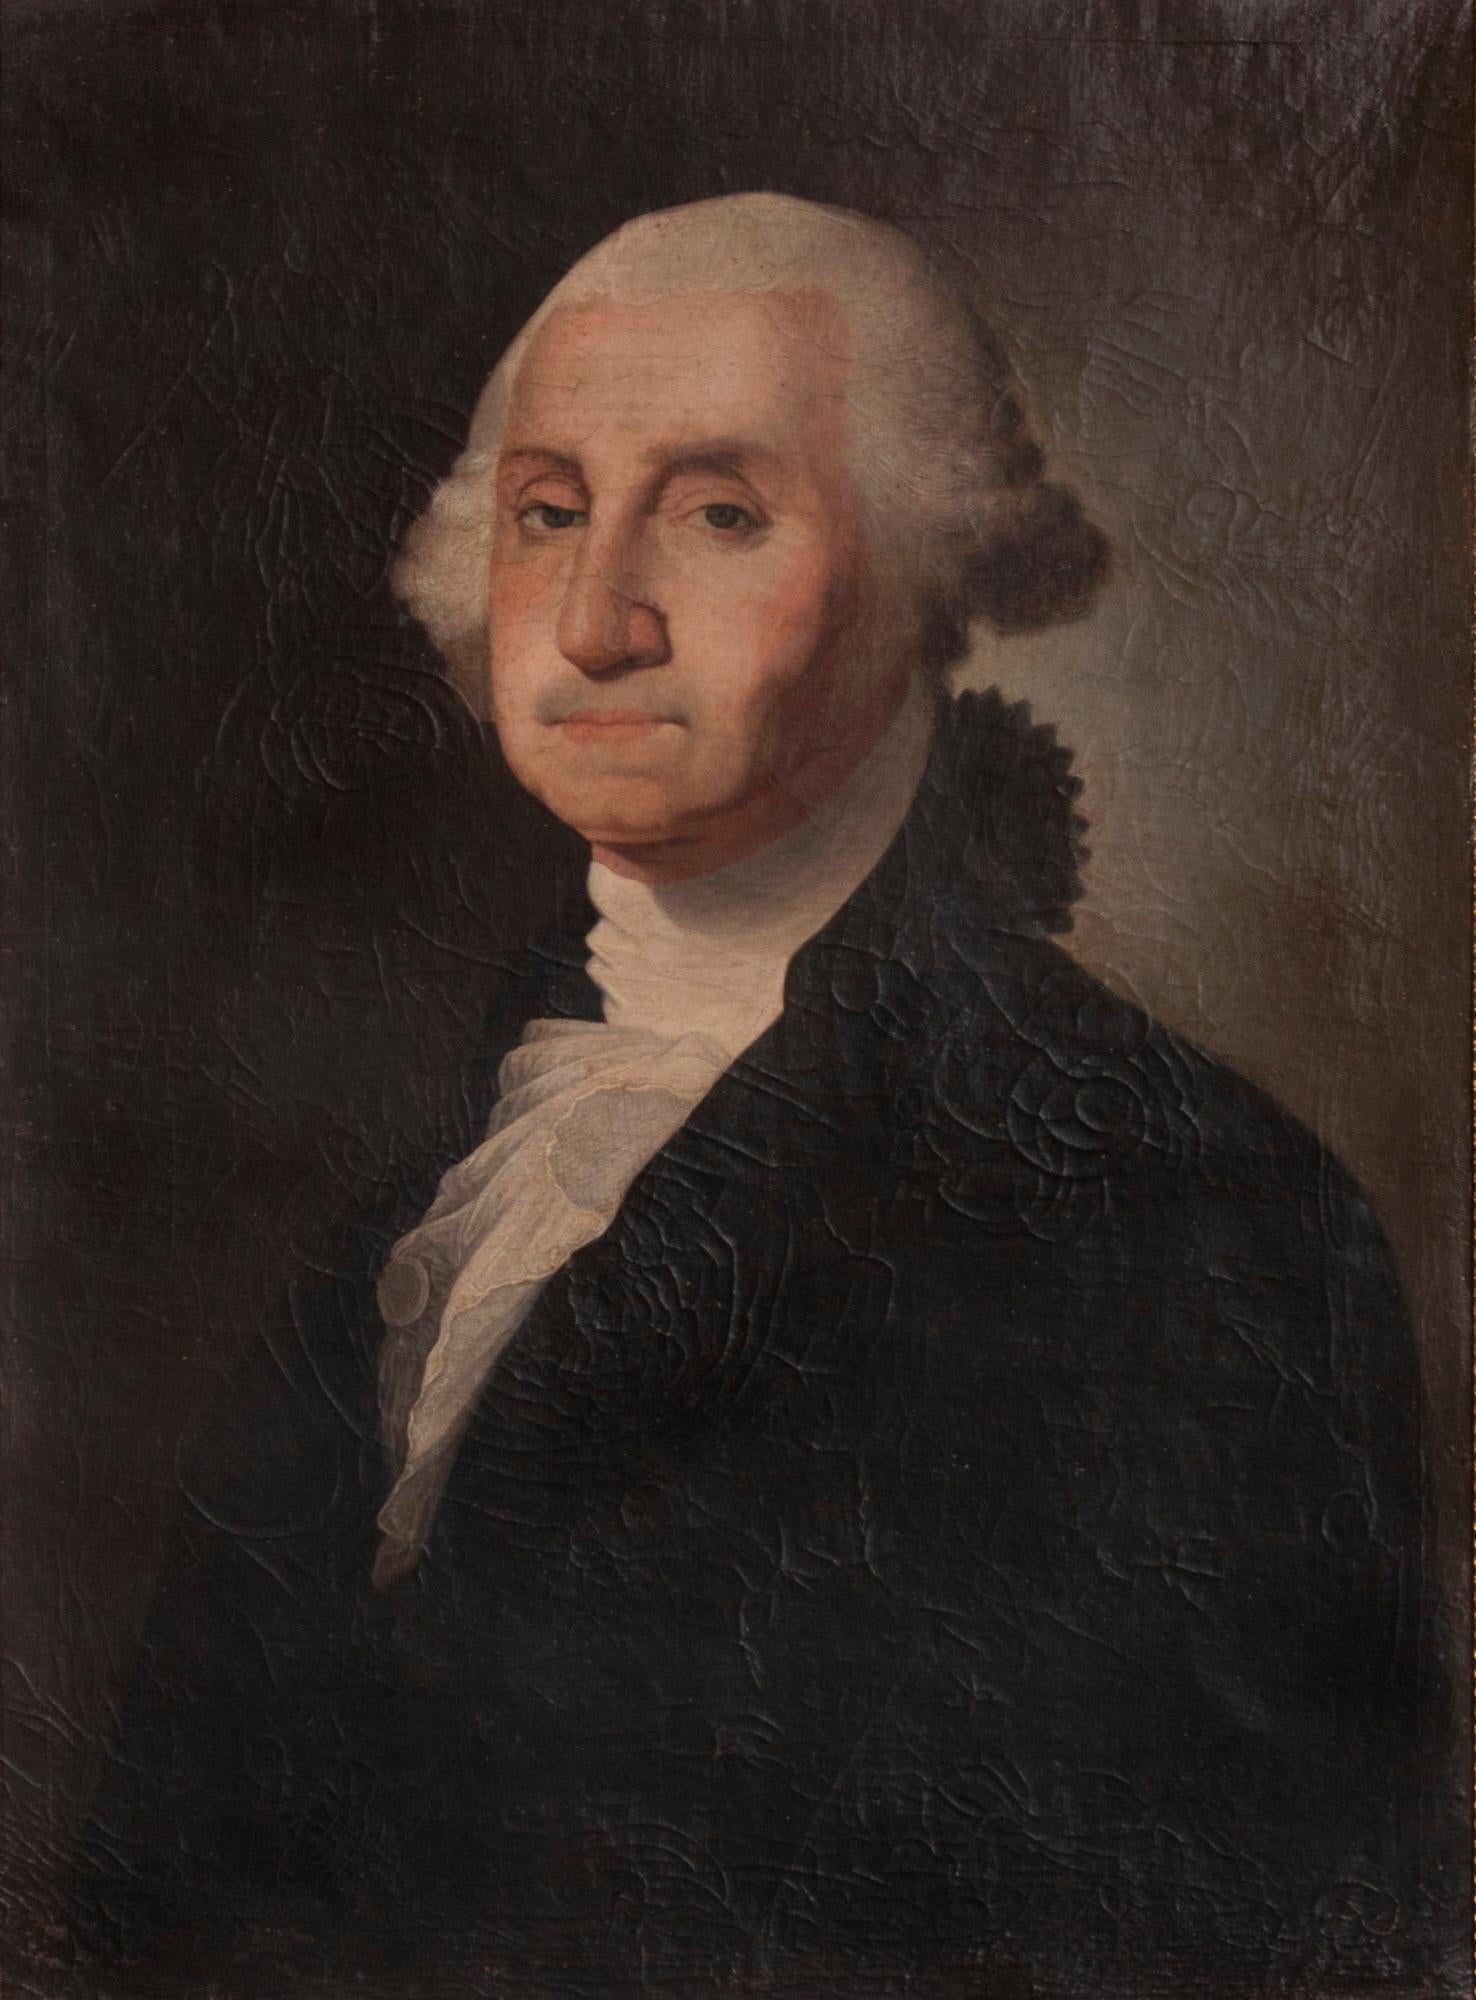 Painting of George Washington in oil on canvas, an early example, rendered circa 1850, a very pleasing and well-executed copy of Gilbert Stuart's Athenaeum portrait

Oil on canvas portrait of George Washington, painted circa 1850. The image is